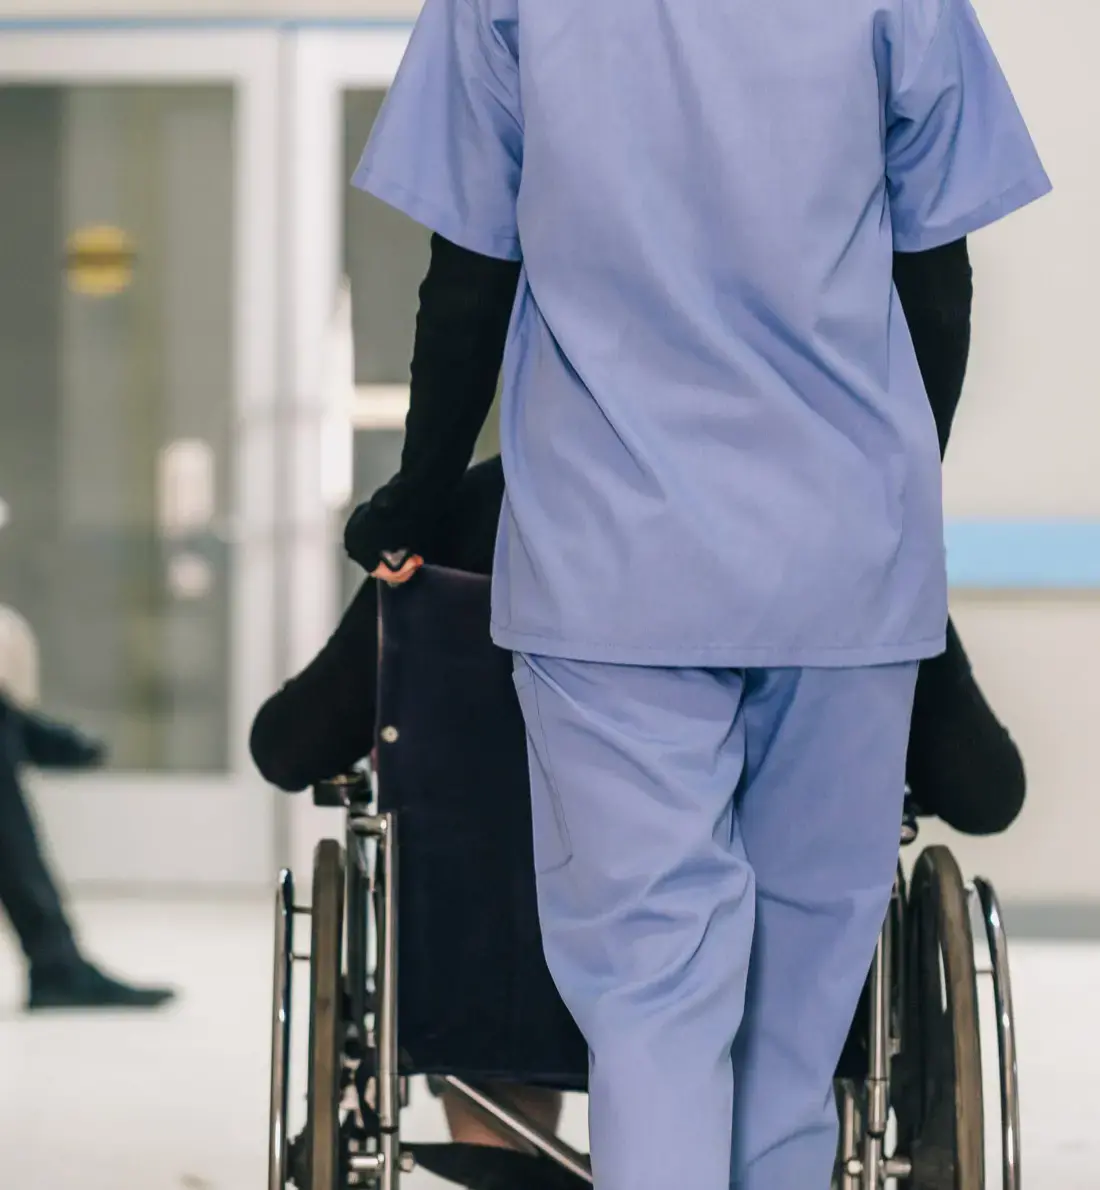 Nurse Pushing Wheelchair with Patient in Hospital